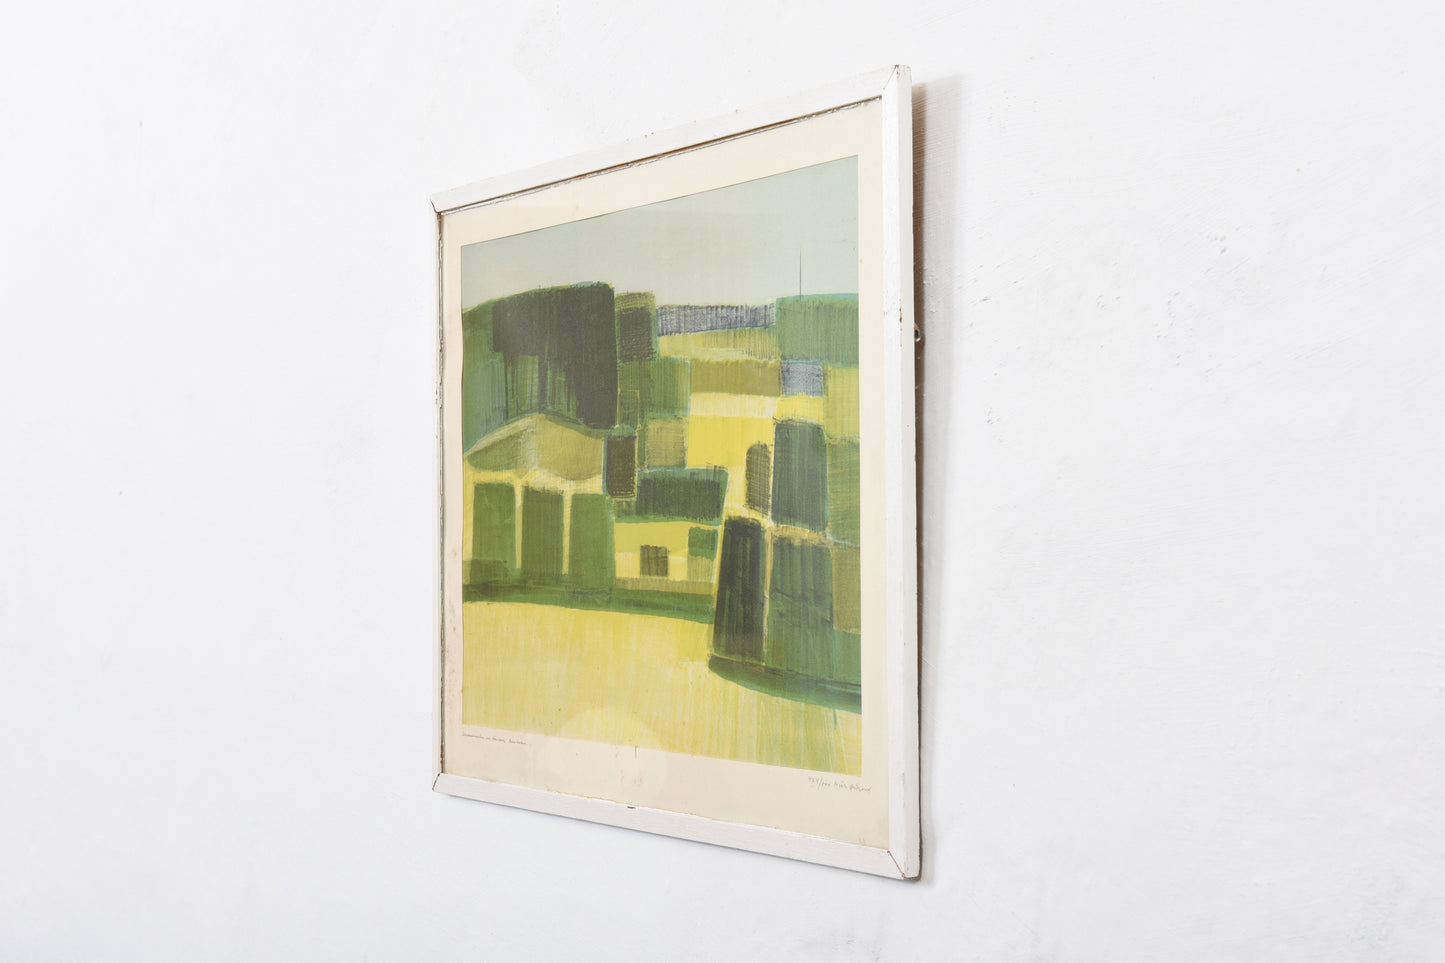 Framed lithograph by Niels Østergaard - 1959